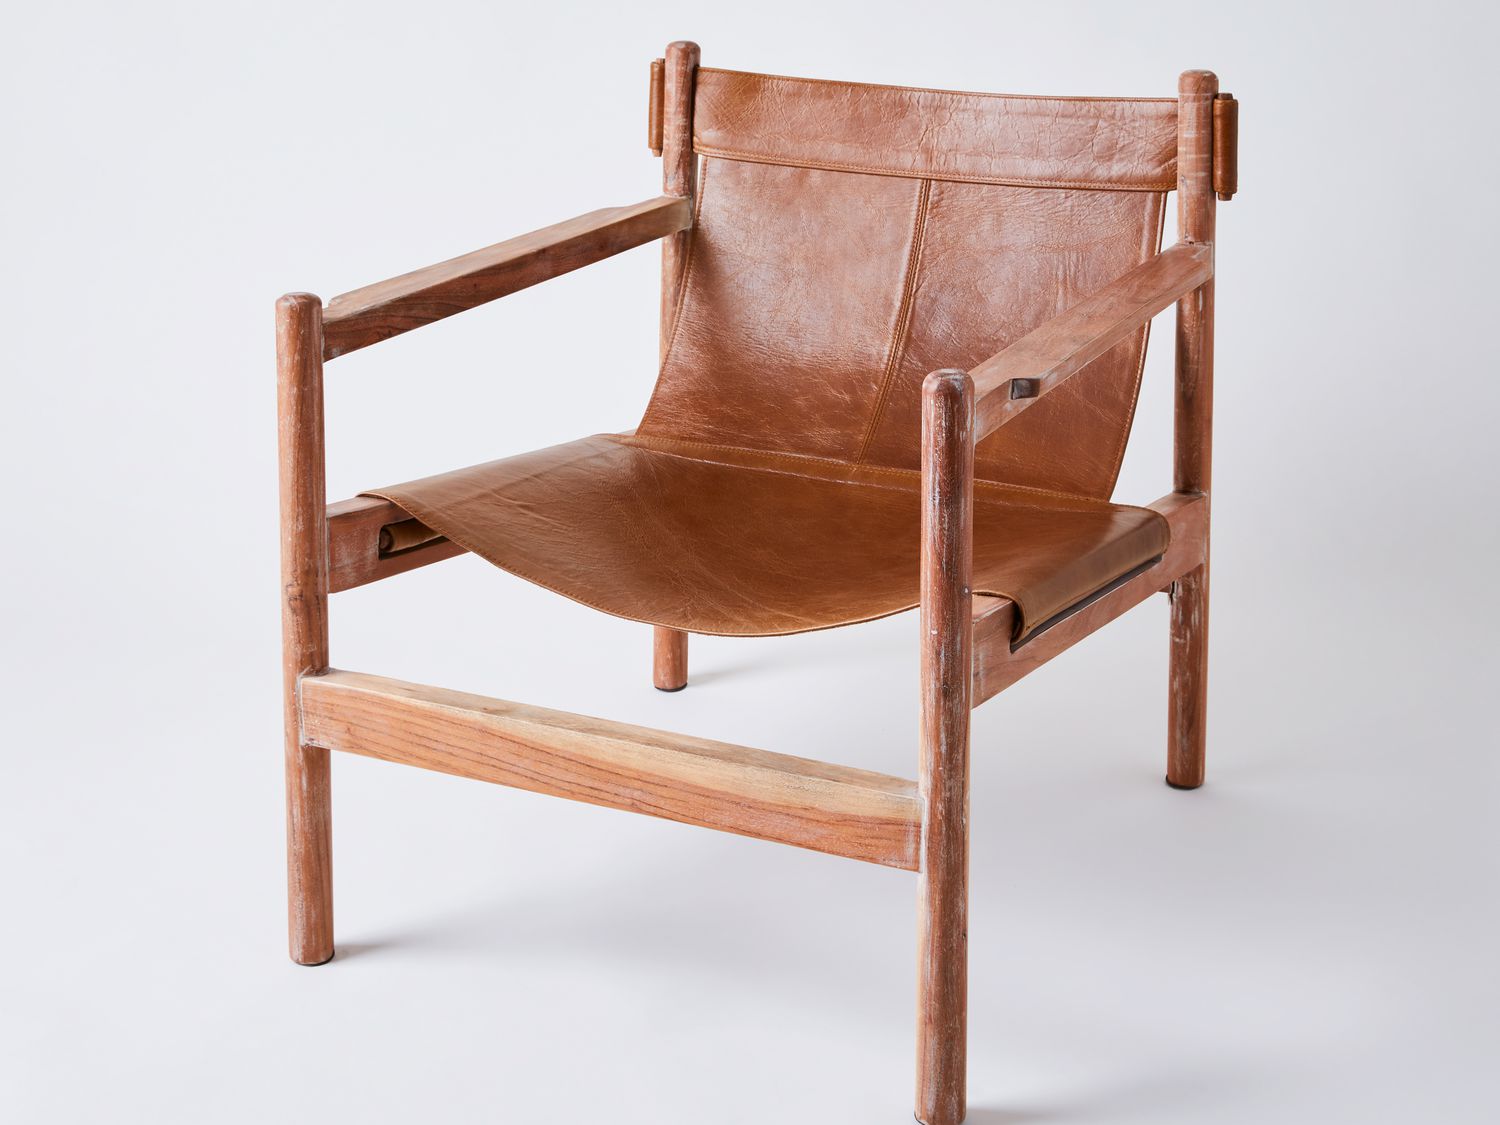 Blackhouse Nolan Sling Leather Chair, Sling Leather Chair